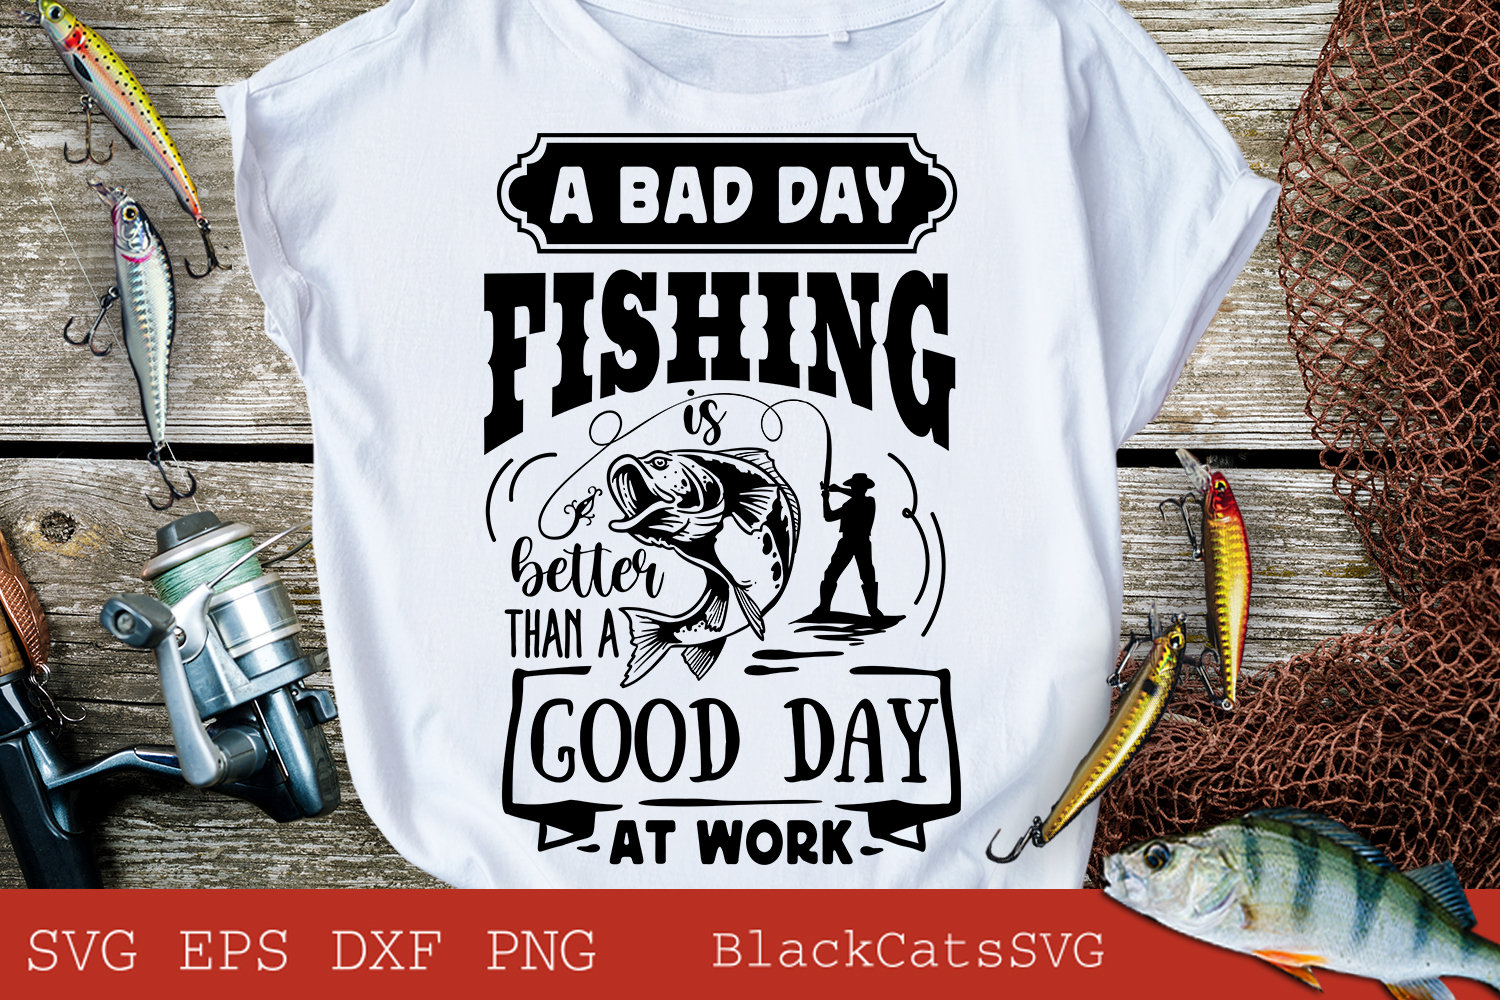 A Bad Day Fishing is Better Than a Good Day at Work Svg, Fishing Poster  Svg, Fish Svg, Fishing Svg, Fishing Shirt, Fathers Day Svg -  Canada